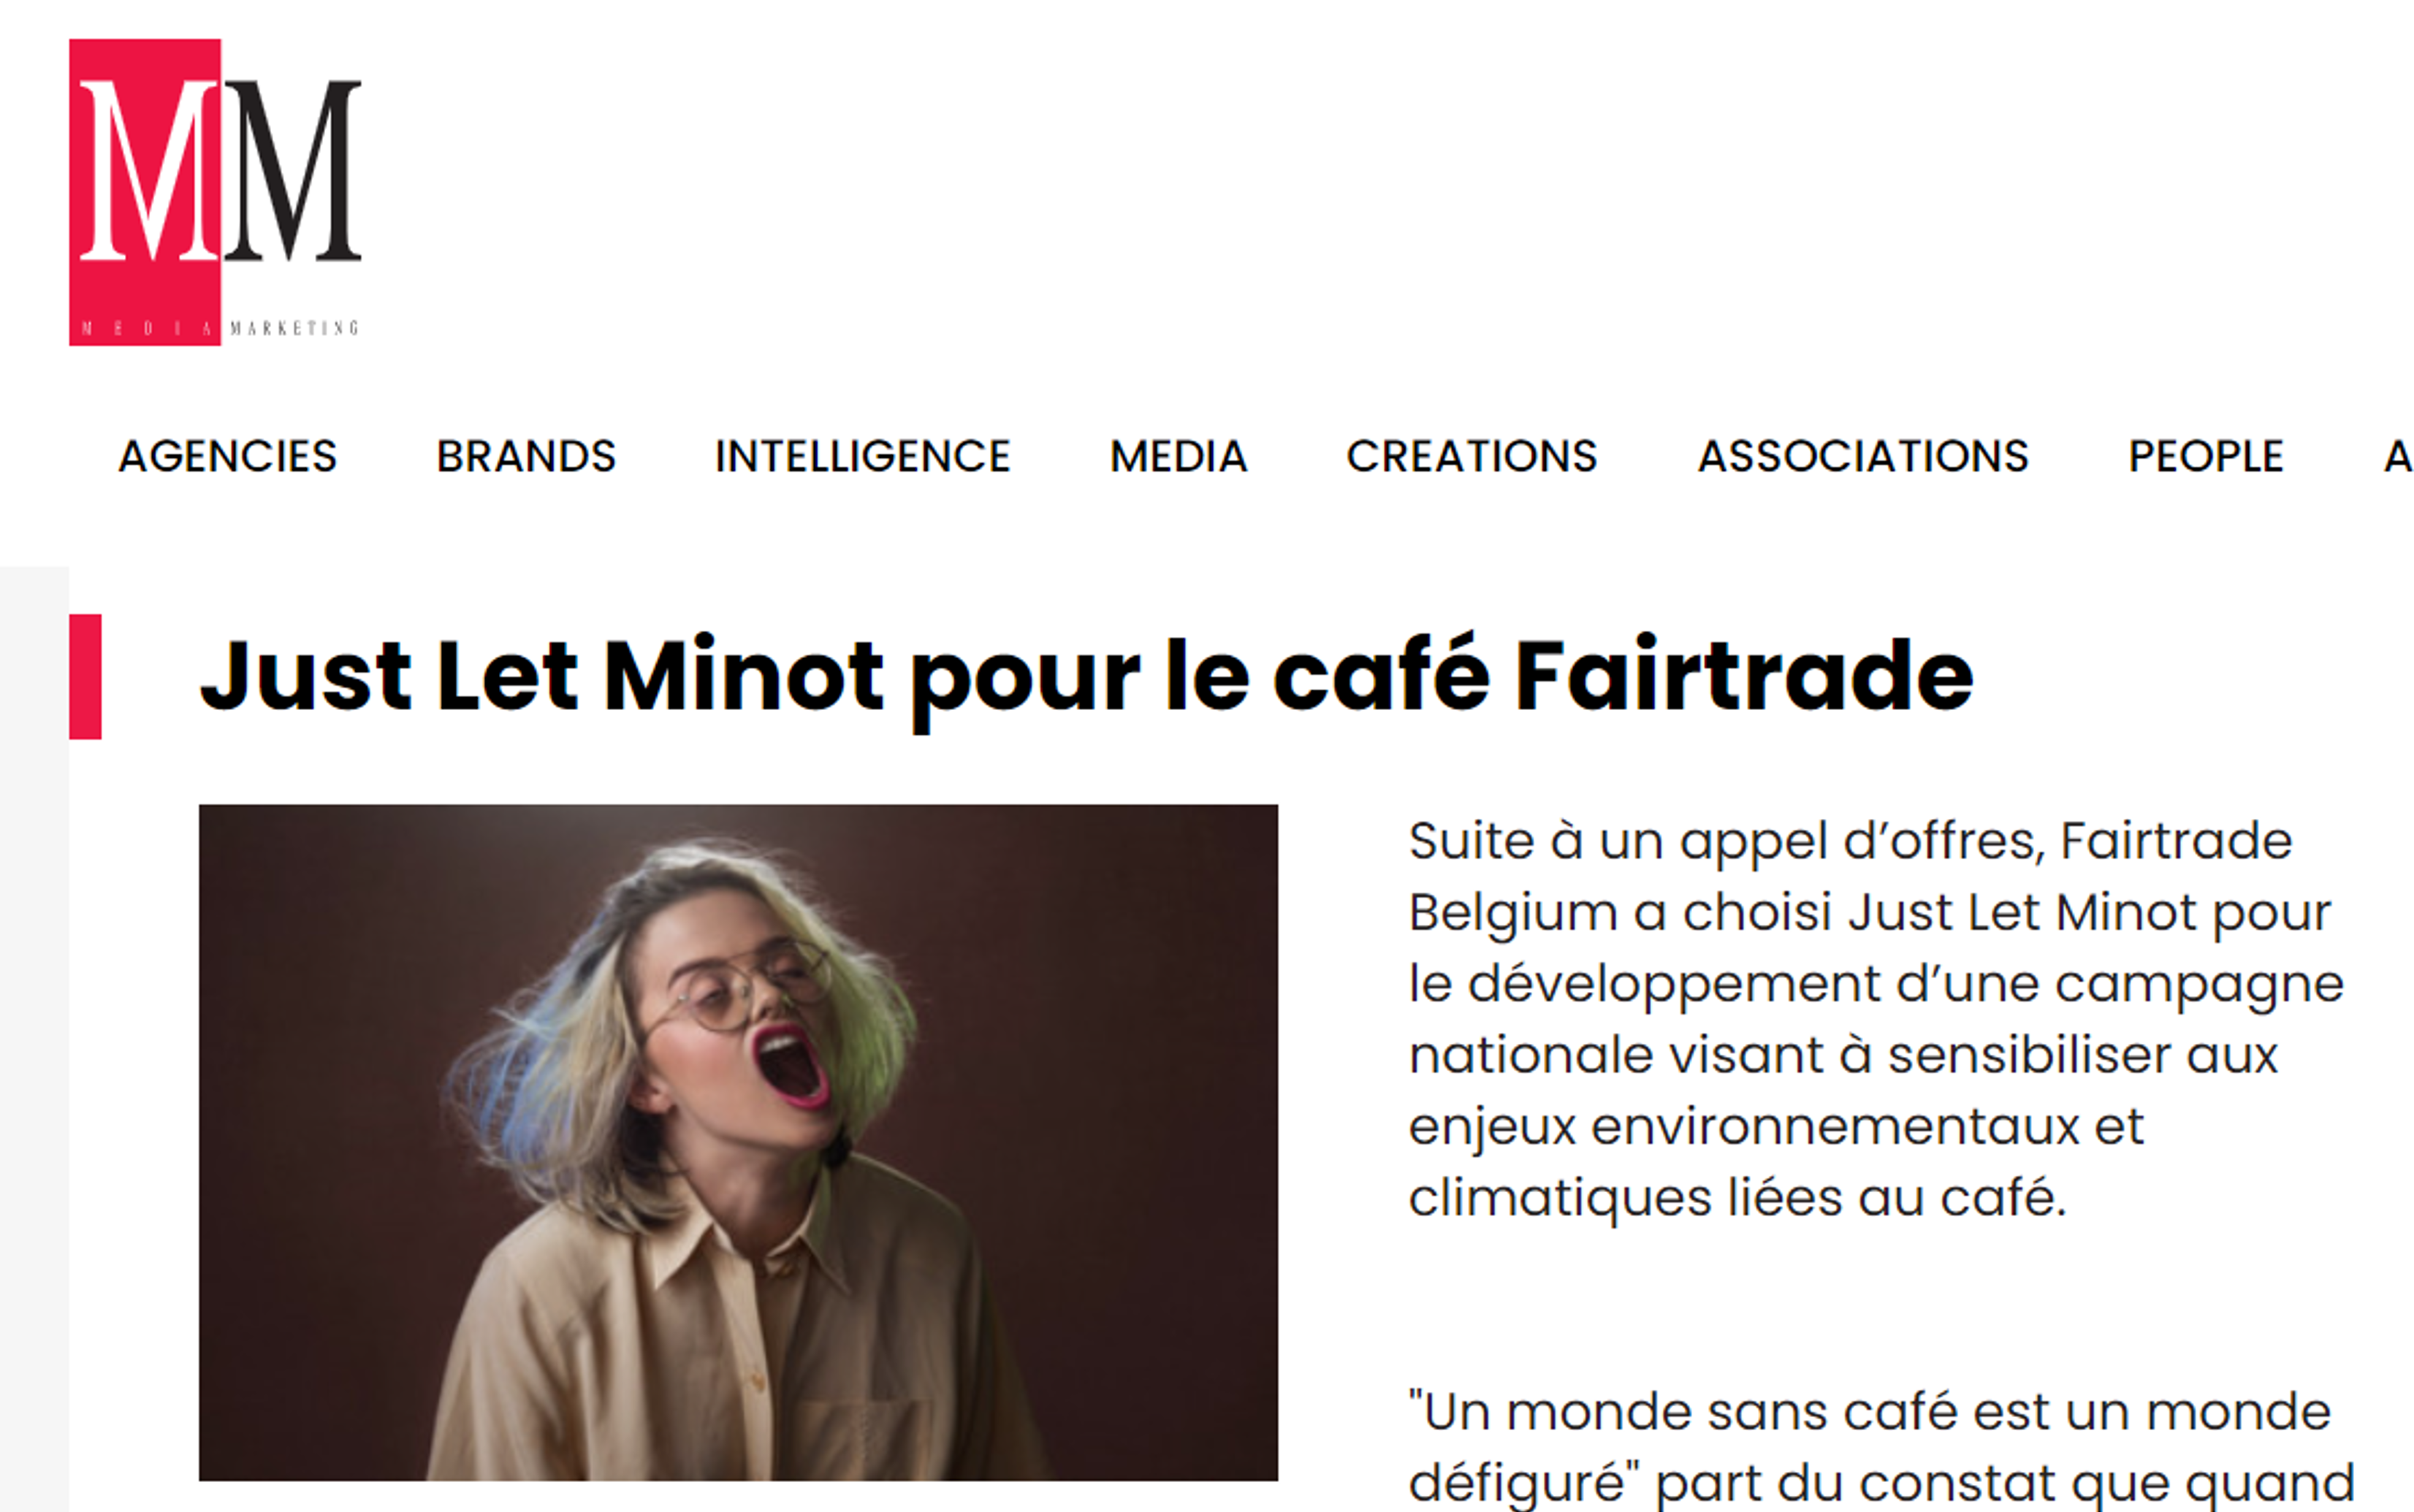 You are currently viewing Media Marketing – Just Let Minot pour le café Fairtrade